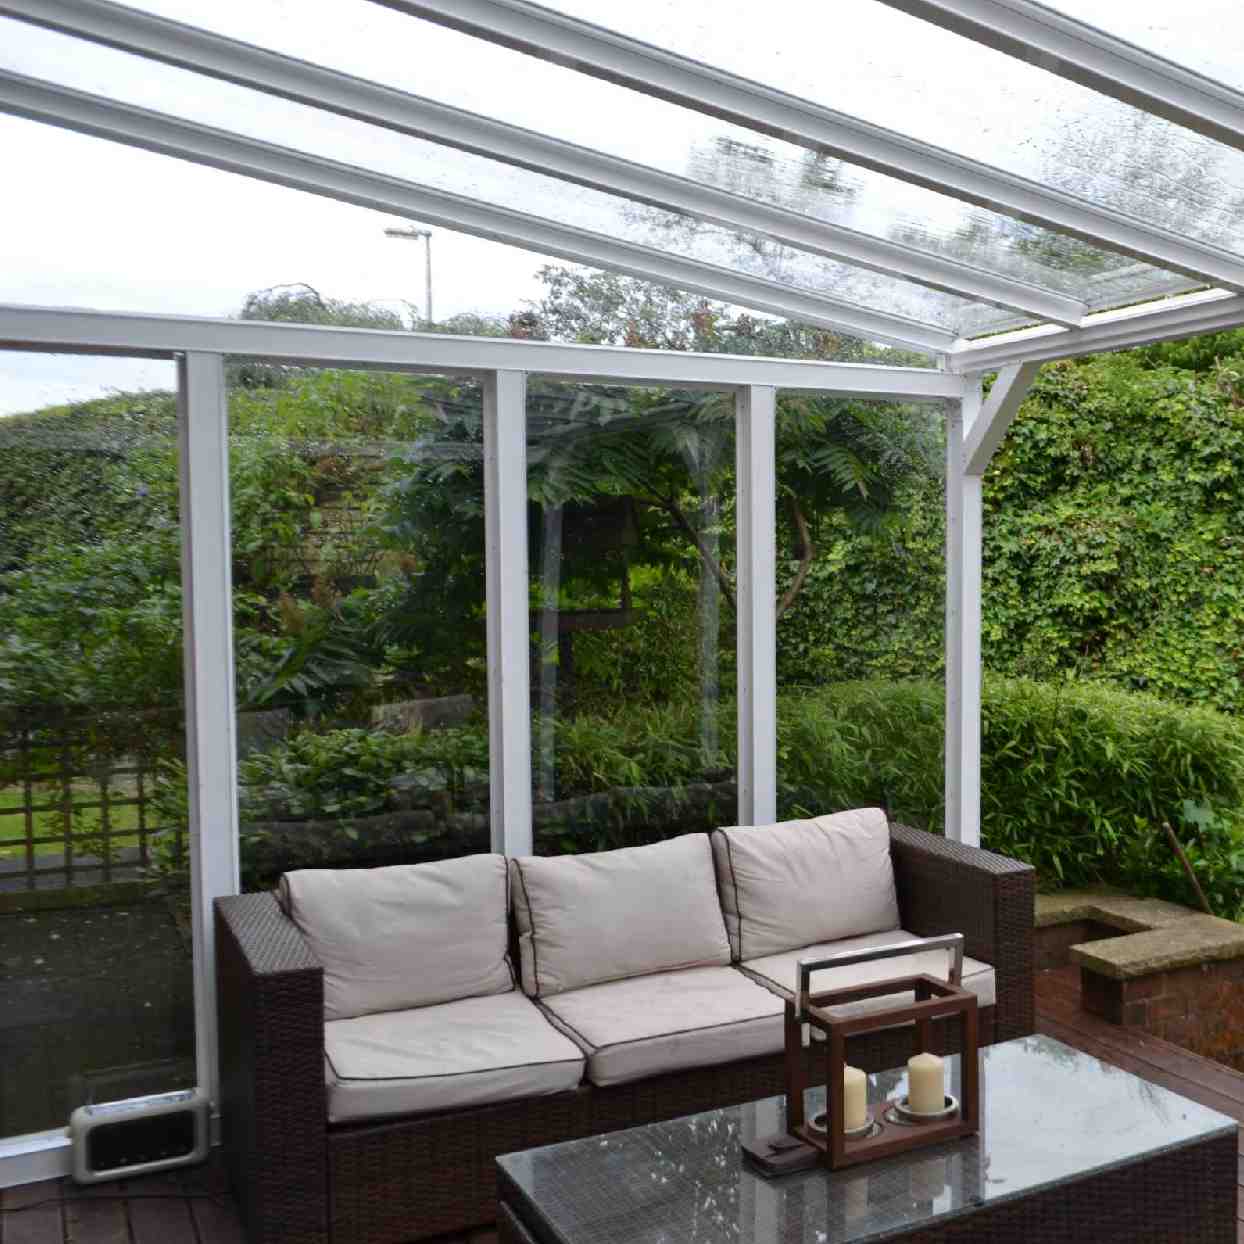 Buy Omega Verandah White with 16mm Polycarbonate Glazing - 7.4m (W) x 4.5m (P), (4) Supporting Posts online today